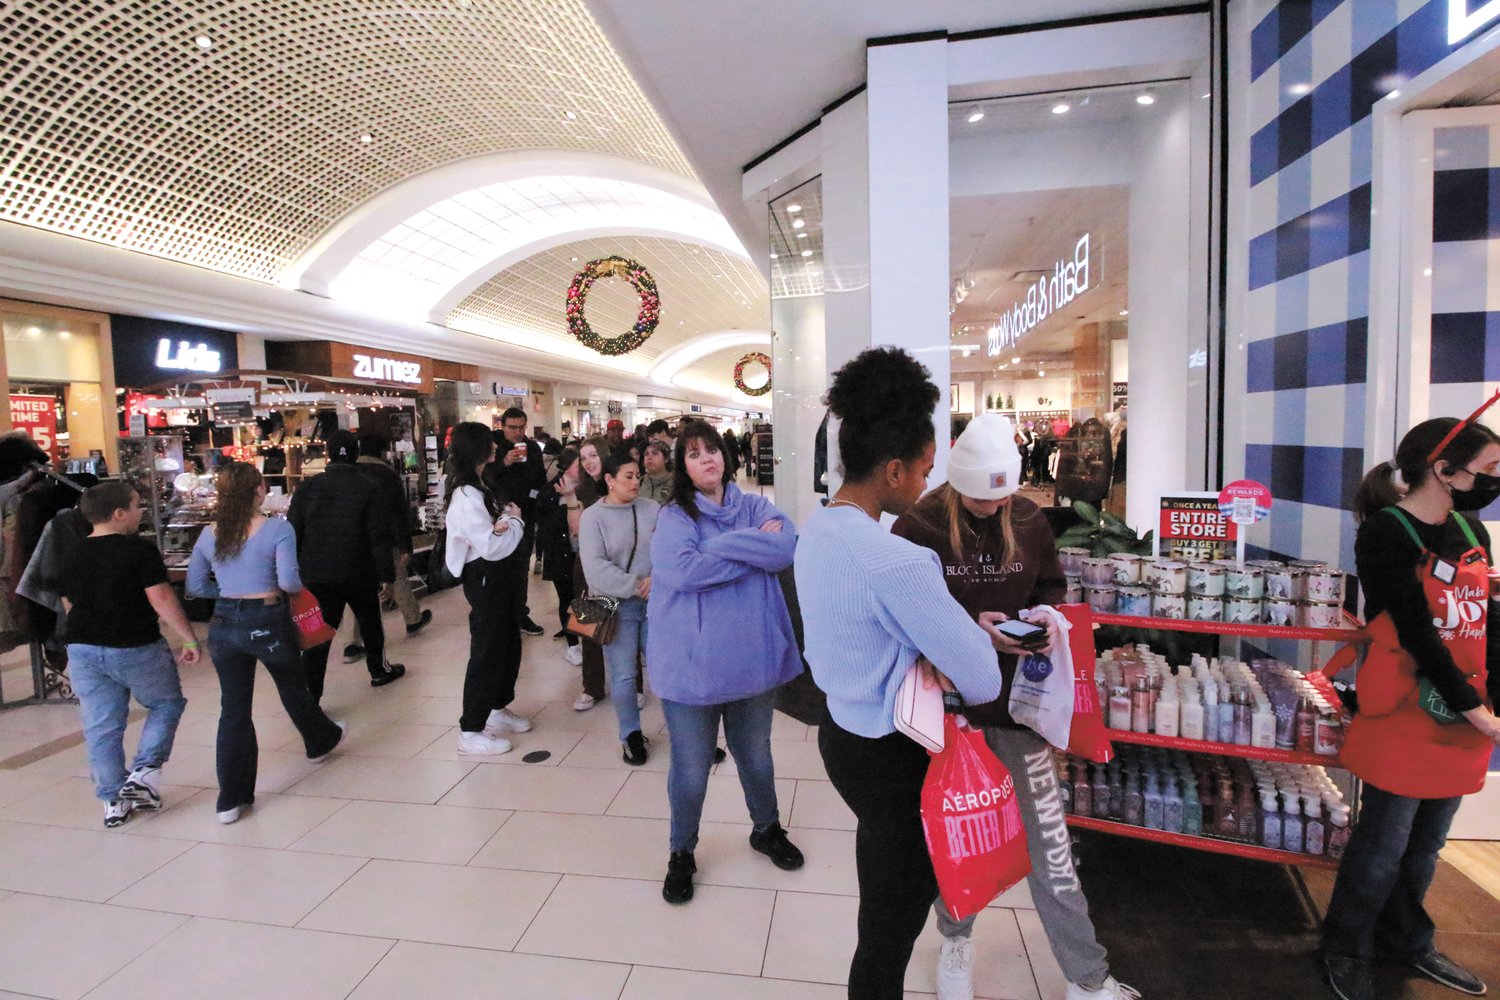 IT’S A WAIT: Shoppers lined up in front of the Bed & Bath in Warwick Mall on Black Friday to take advantage of their but 3, get 3 free deal.